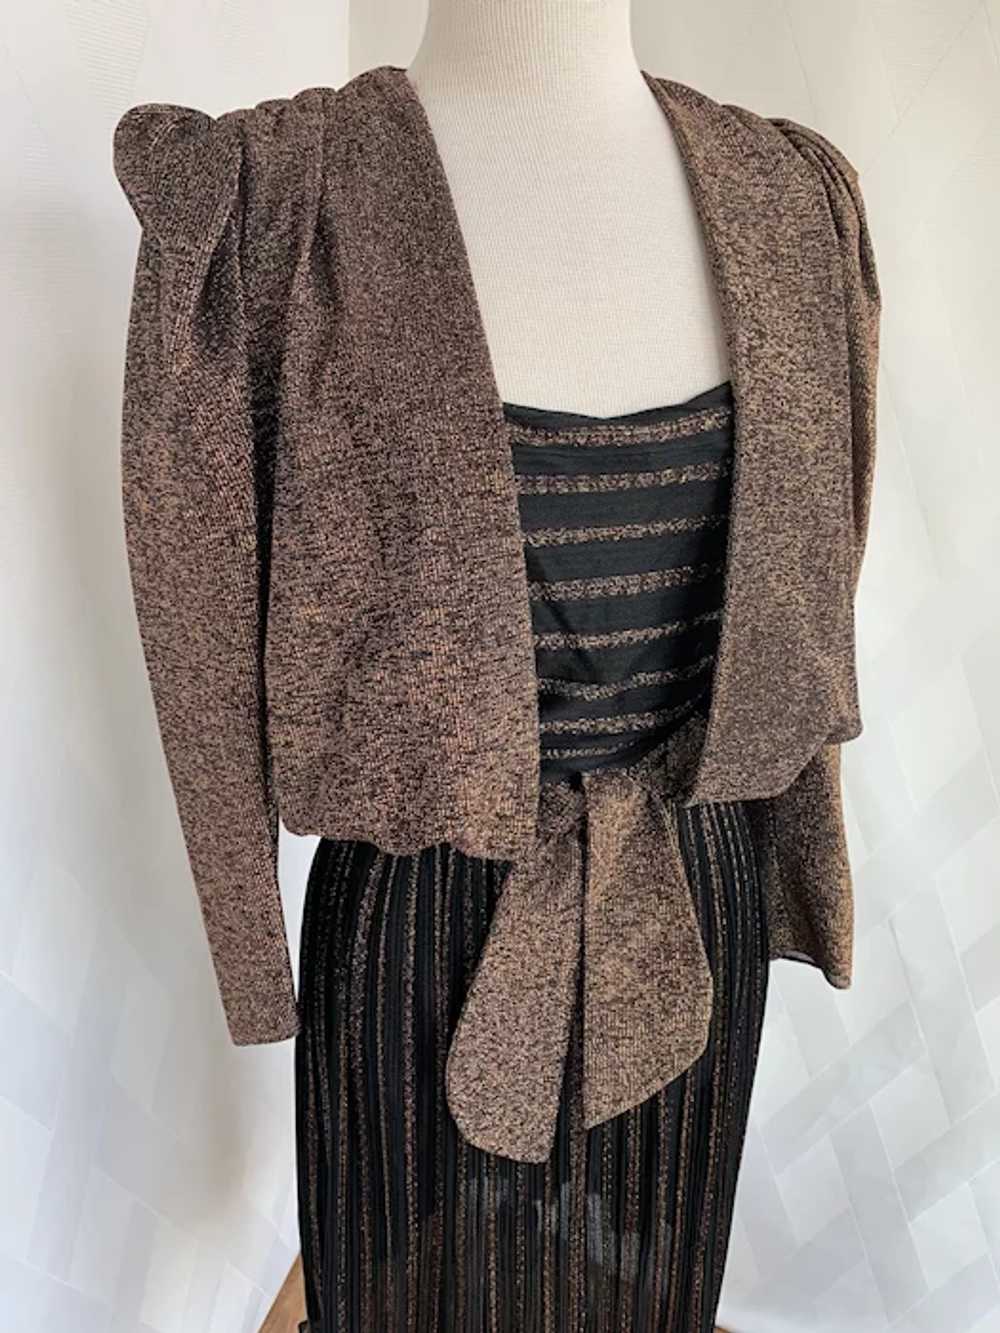 1980s Strappy, Copper Metallic Dress with Jacket - image 4